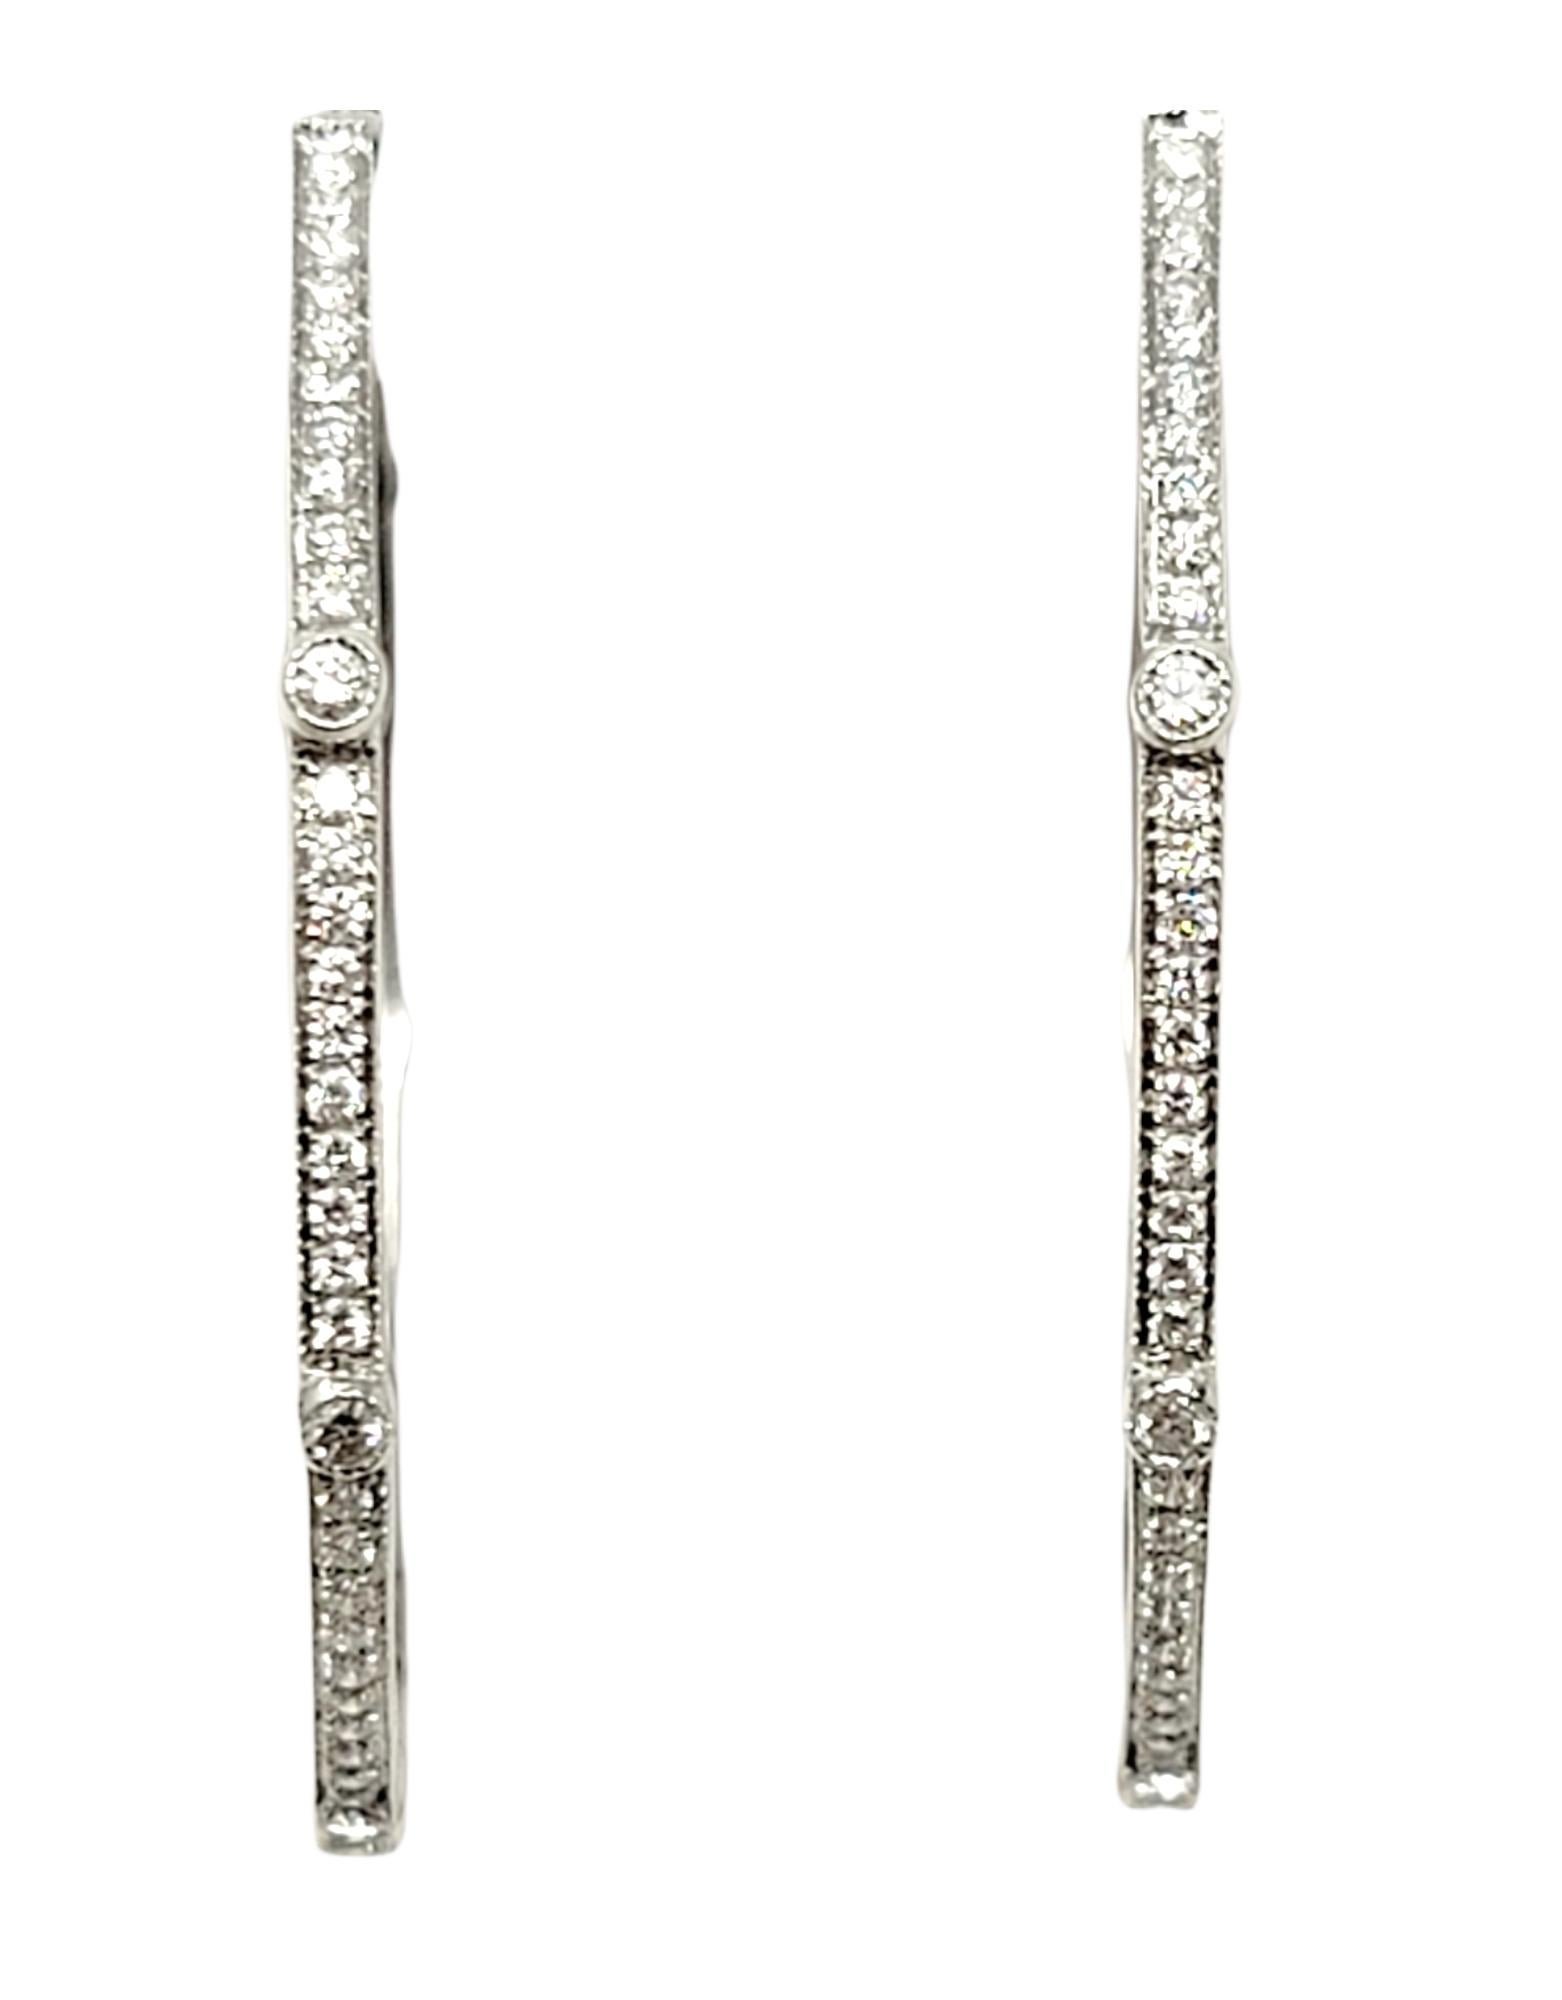 Chic, modern white gold and diamond hoop earrings are an absolute must for your jewelry wardrobe! Dress them up or down, take them from the office to date night, these timeless earrings are the perfect pair.

Earring style: Hoop
Metal: 18K White